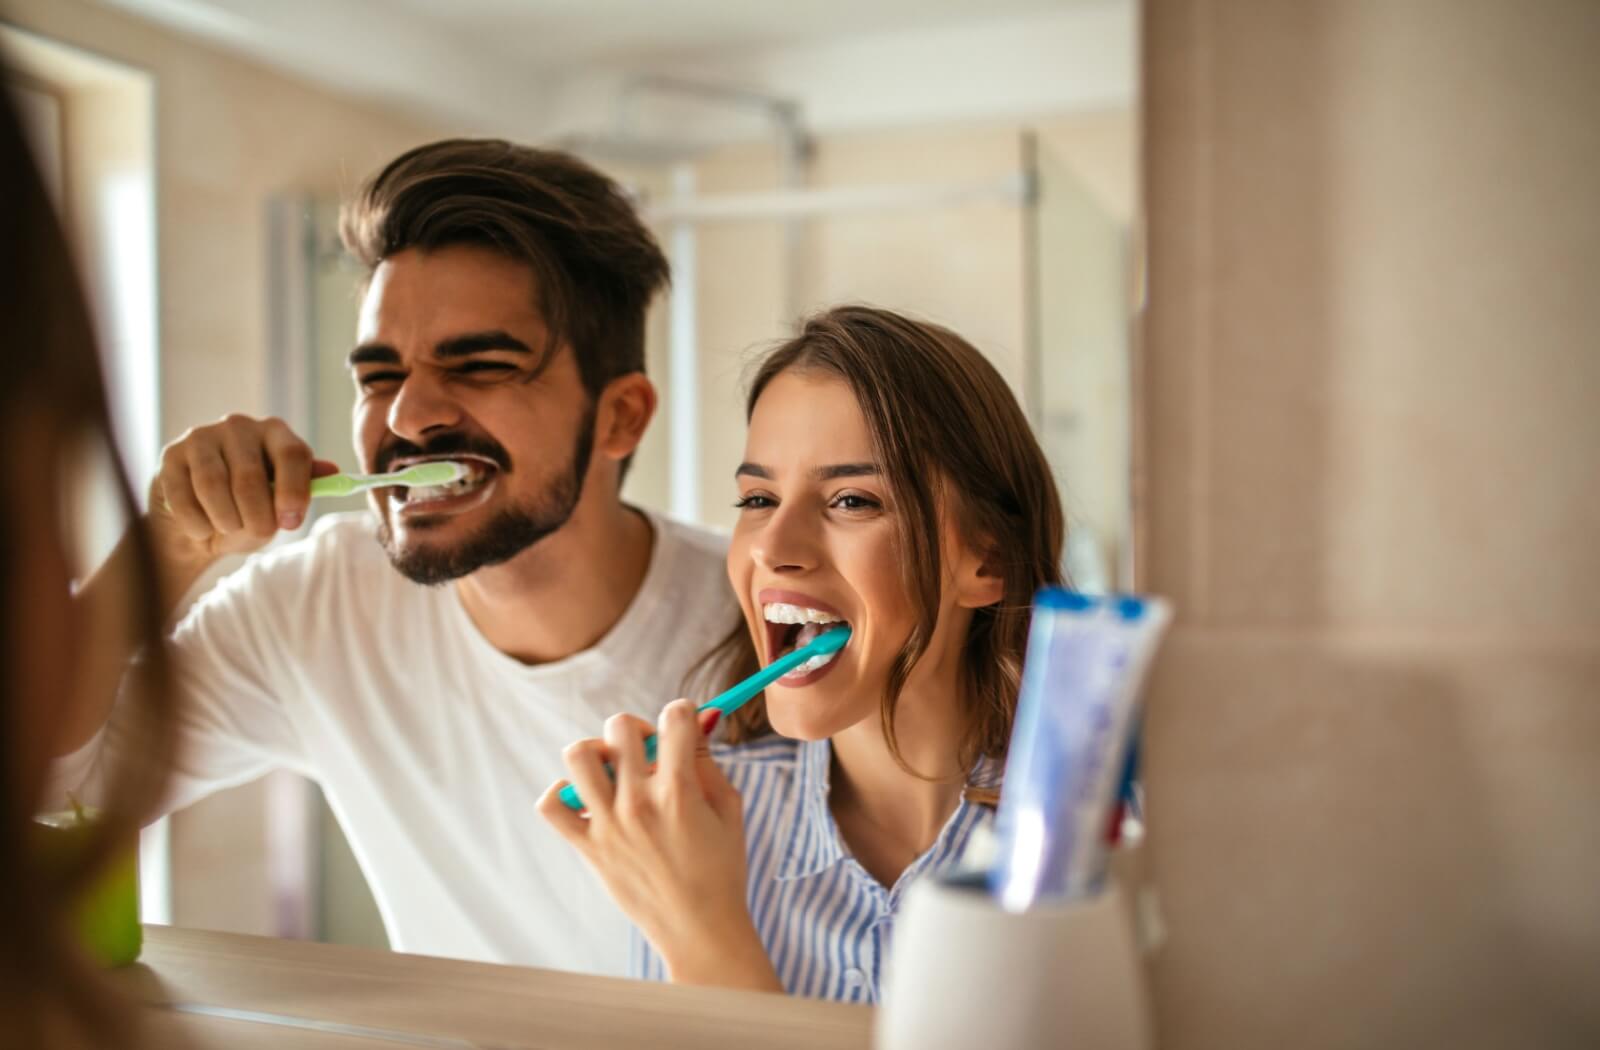 A young couple brushing their teeth together in front of a bathroom mirror.
